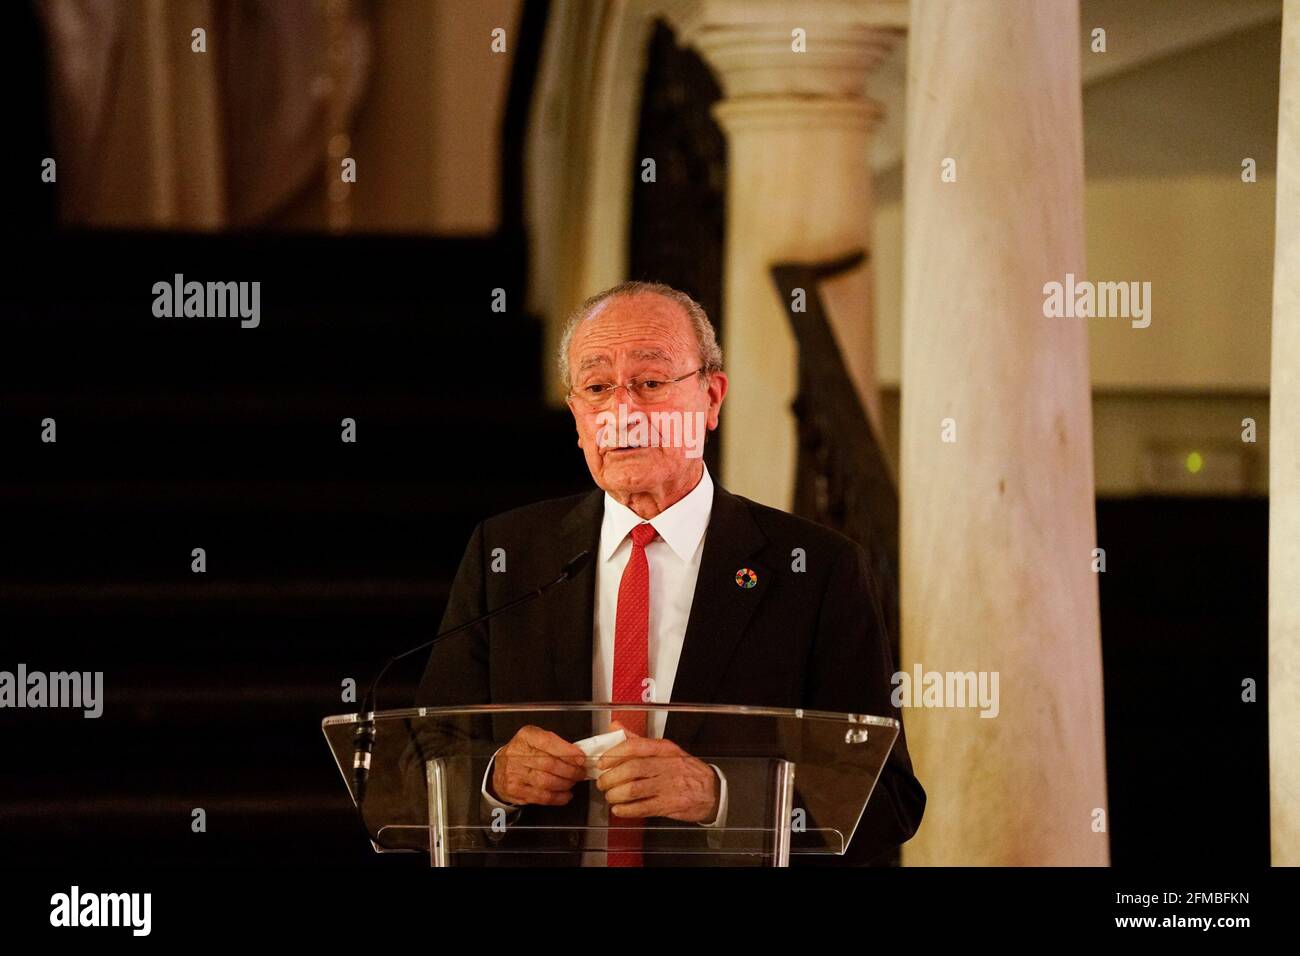 Malaga, Spain. 07th May, 2021. Mayor of Malaga, Francisco de la Torre Prados seen speaking during the exhibition at Centro Cultural Fundacion Unicaja. 'Un siglo de esplendor' is an exhibition that shows the artistic heritage of the Holy Week brotherhoods of Malaga and is one of the events organized by Agrupacion de Cofradias de Semana Santa de Malaga for the centenary of the institution. Credit: SOPA Images Limited/Alamy Live News Stock Photo